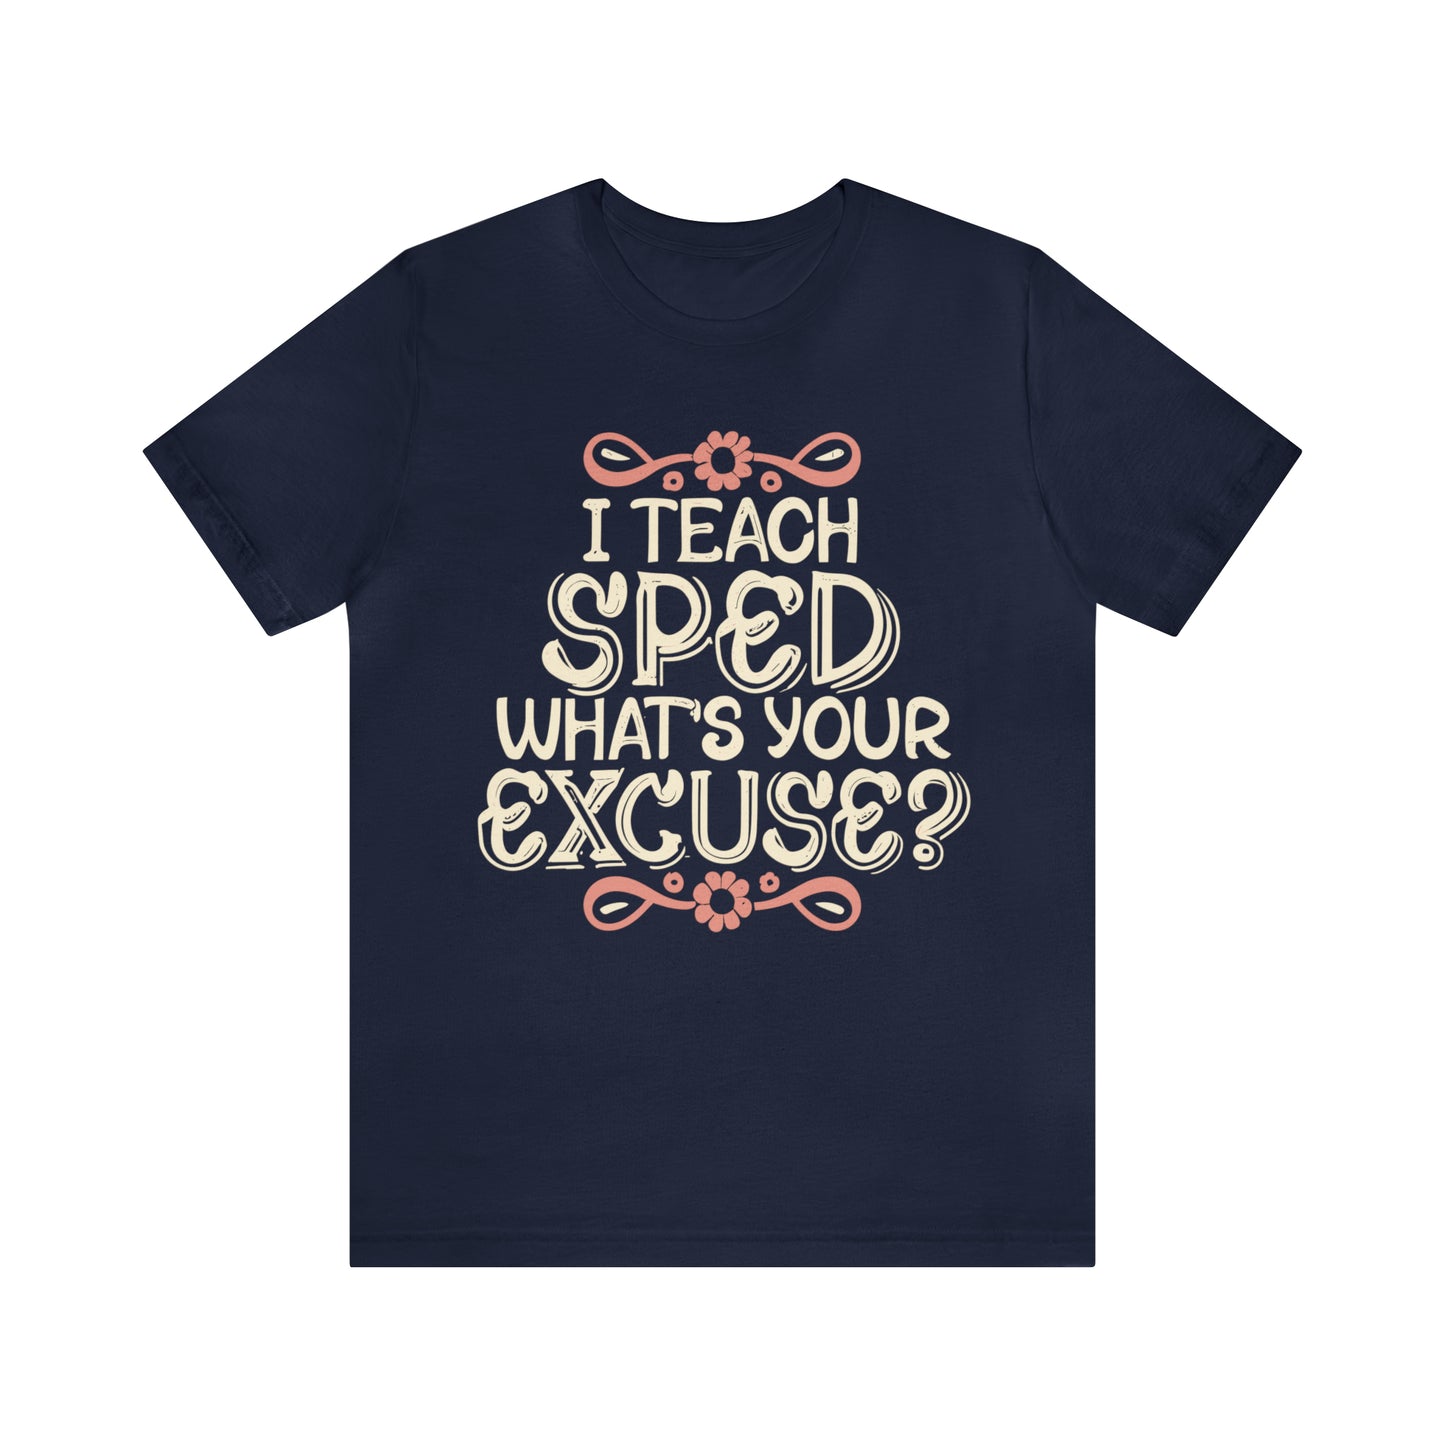 Special Ed Teacher Tshirt - "I Teach SPED - What's Your Excuse"